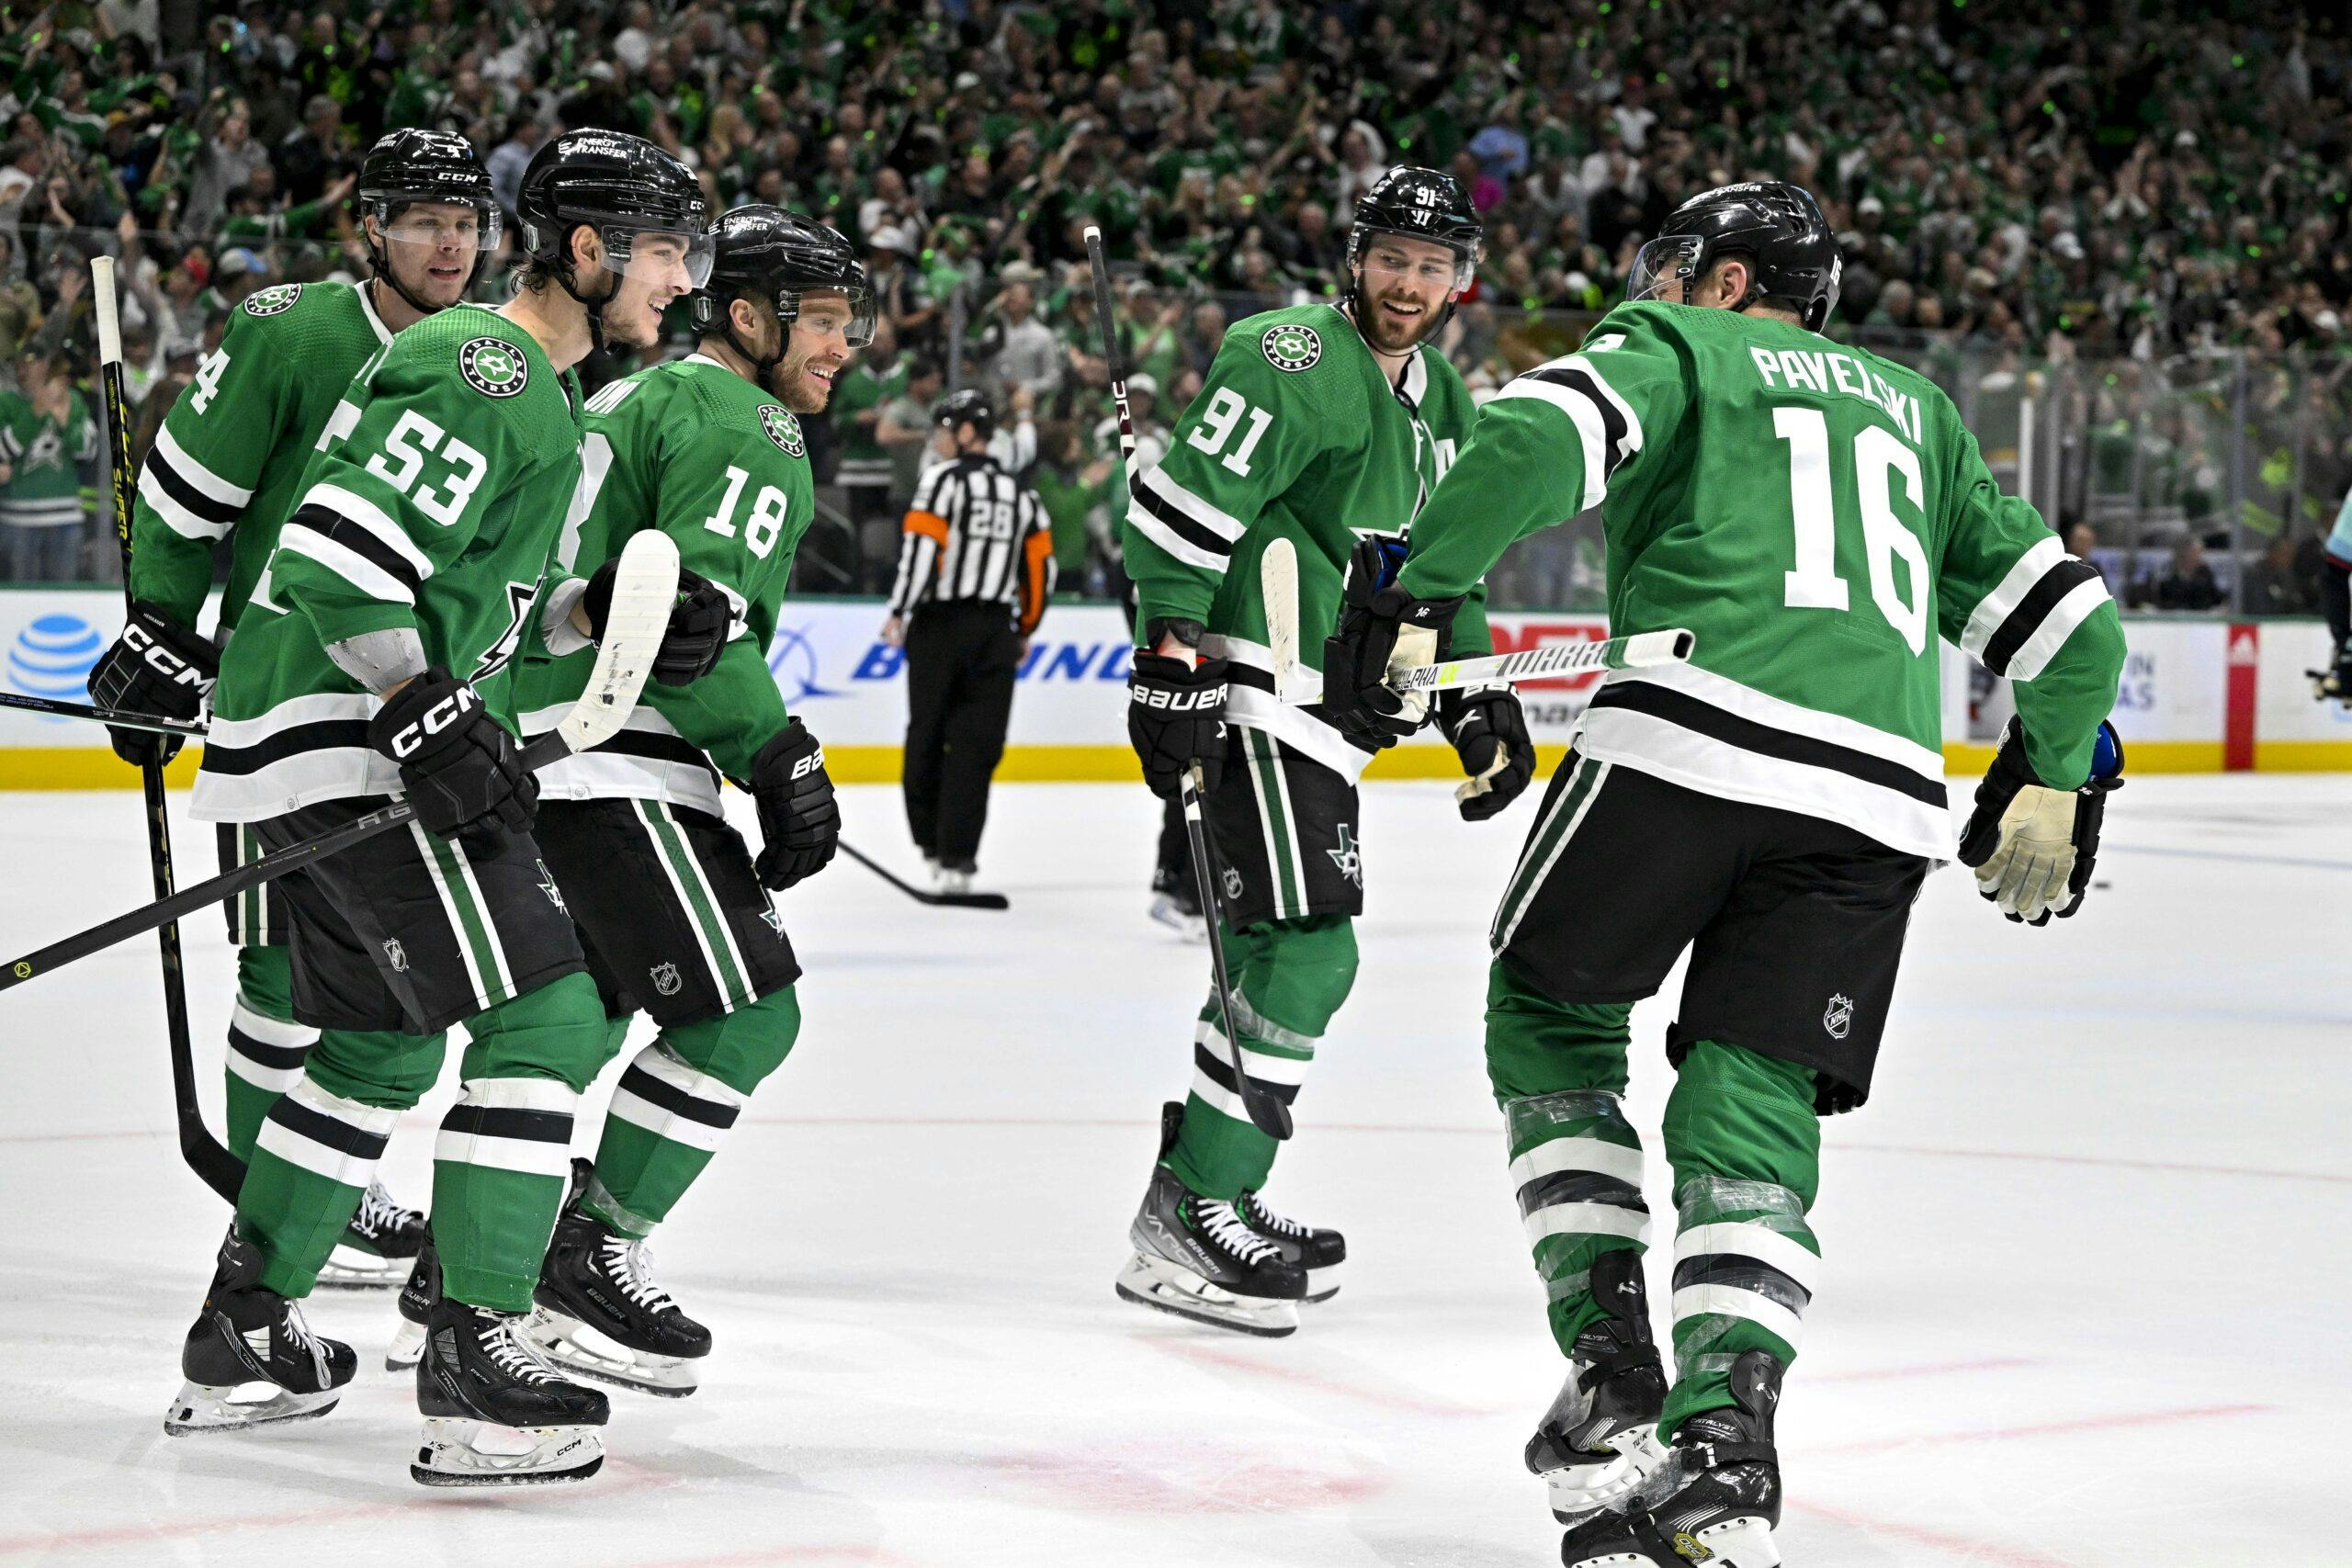 Stanley Cup Playoffs Day 17: Stars bounce back to tie series, Leafs struggle to beat Bobrovsky and drop both games at home